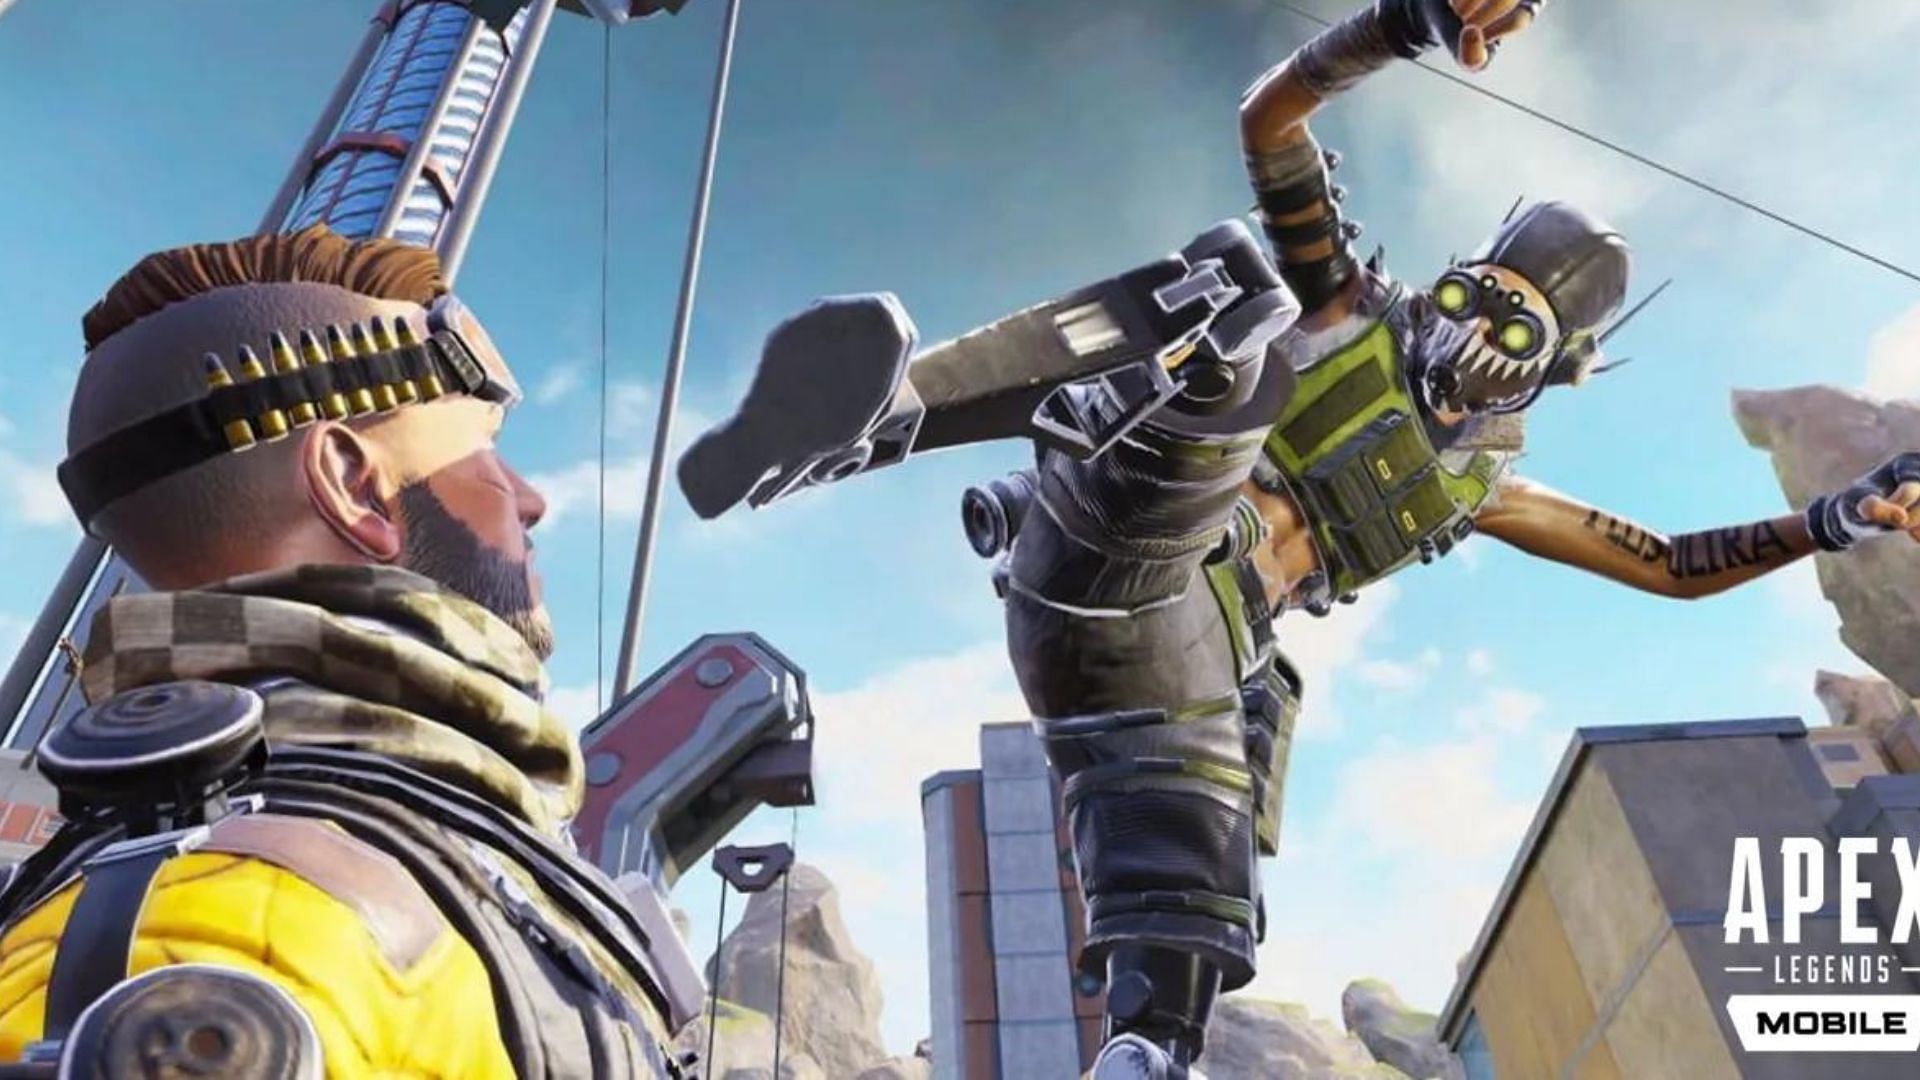 What happened to Apex Legends mobile and its future (Image via Respawn Entertainment)